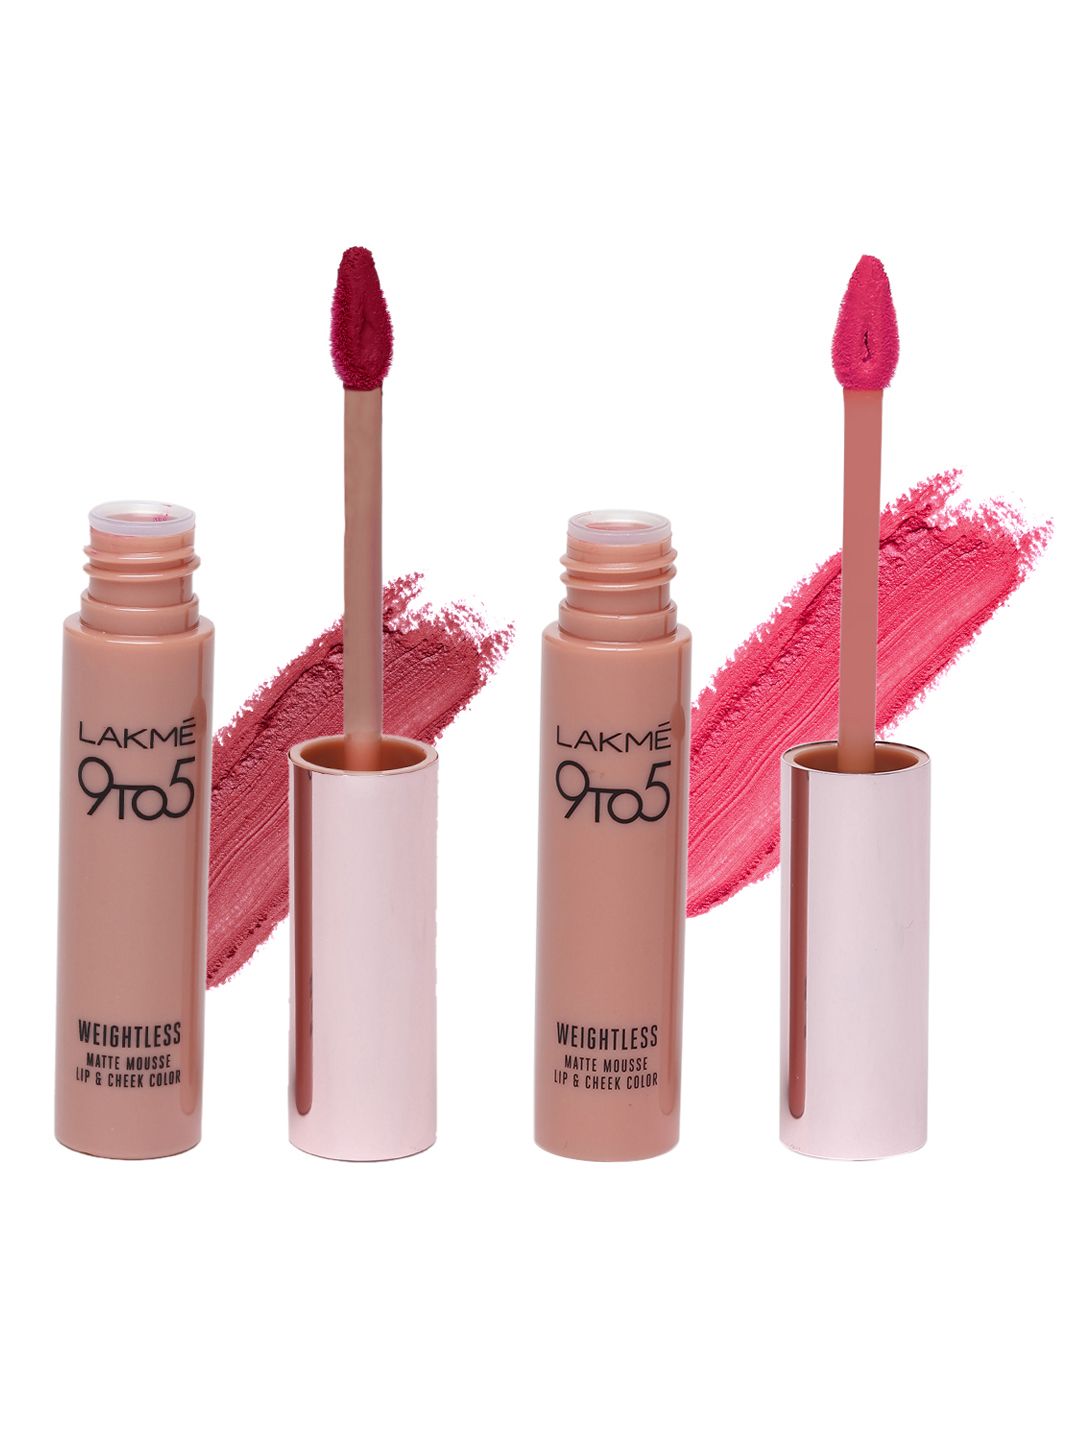 Lakme Fuchsia Suede & Plum Feather 9to5 Weightless Matte Mousse Lip & Cheek Colors Price in India